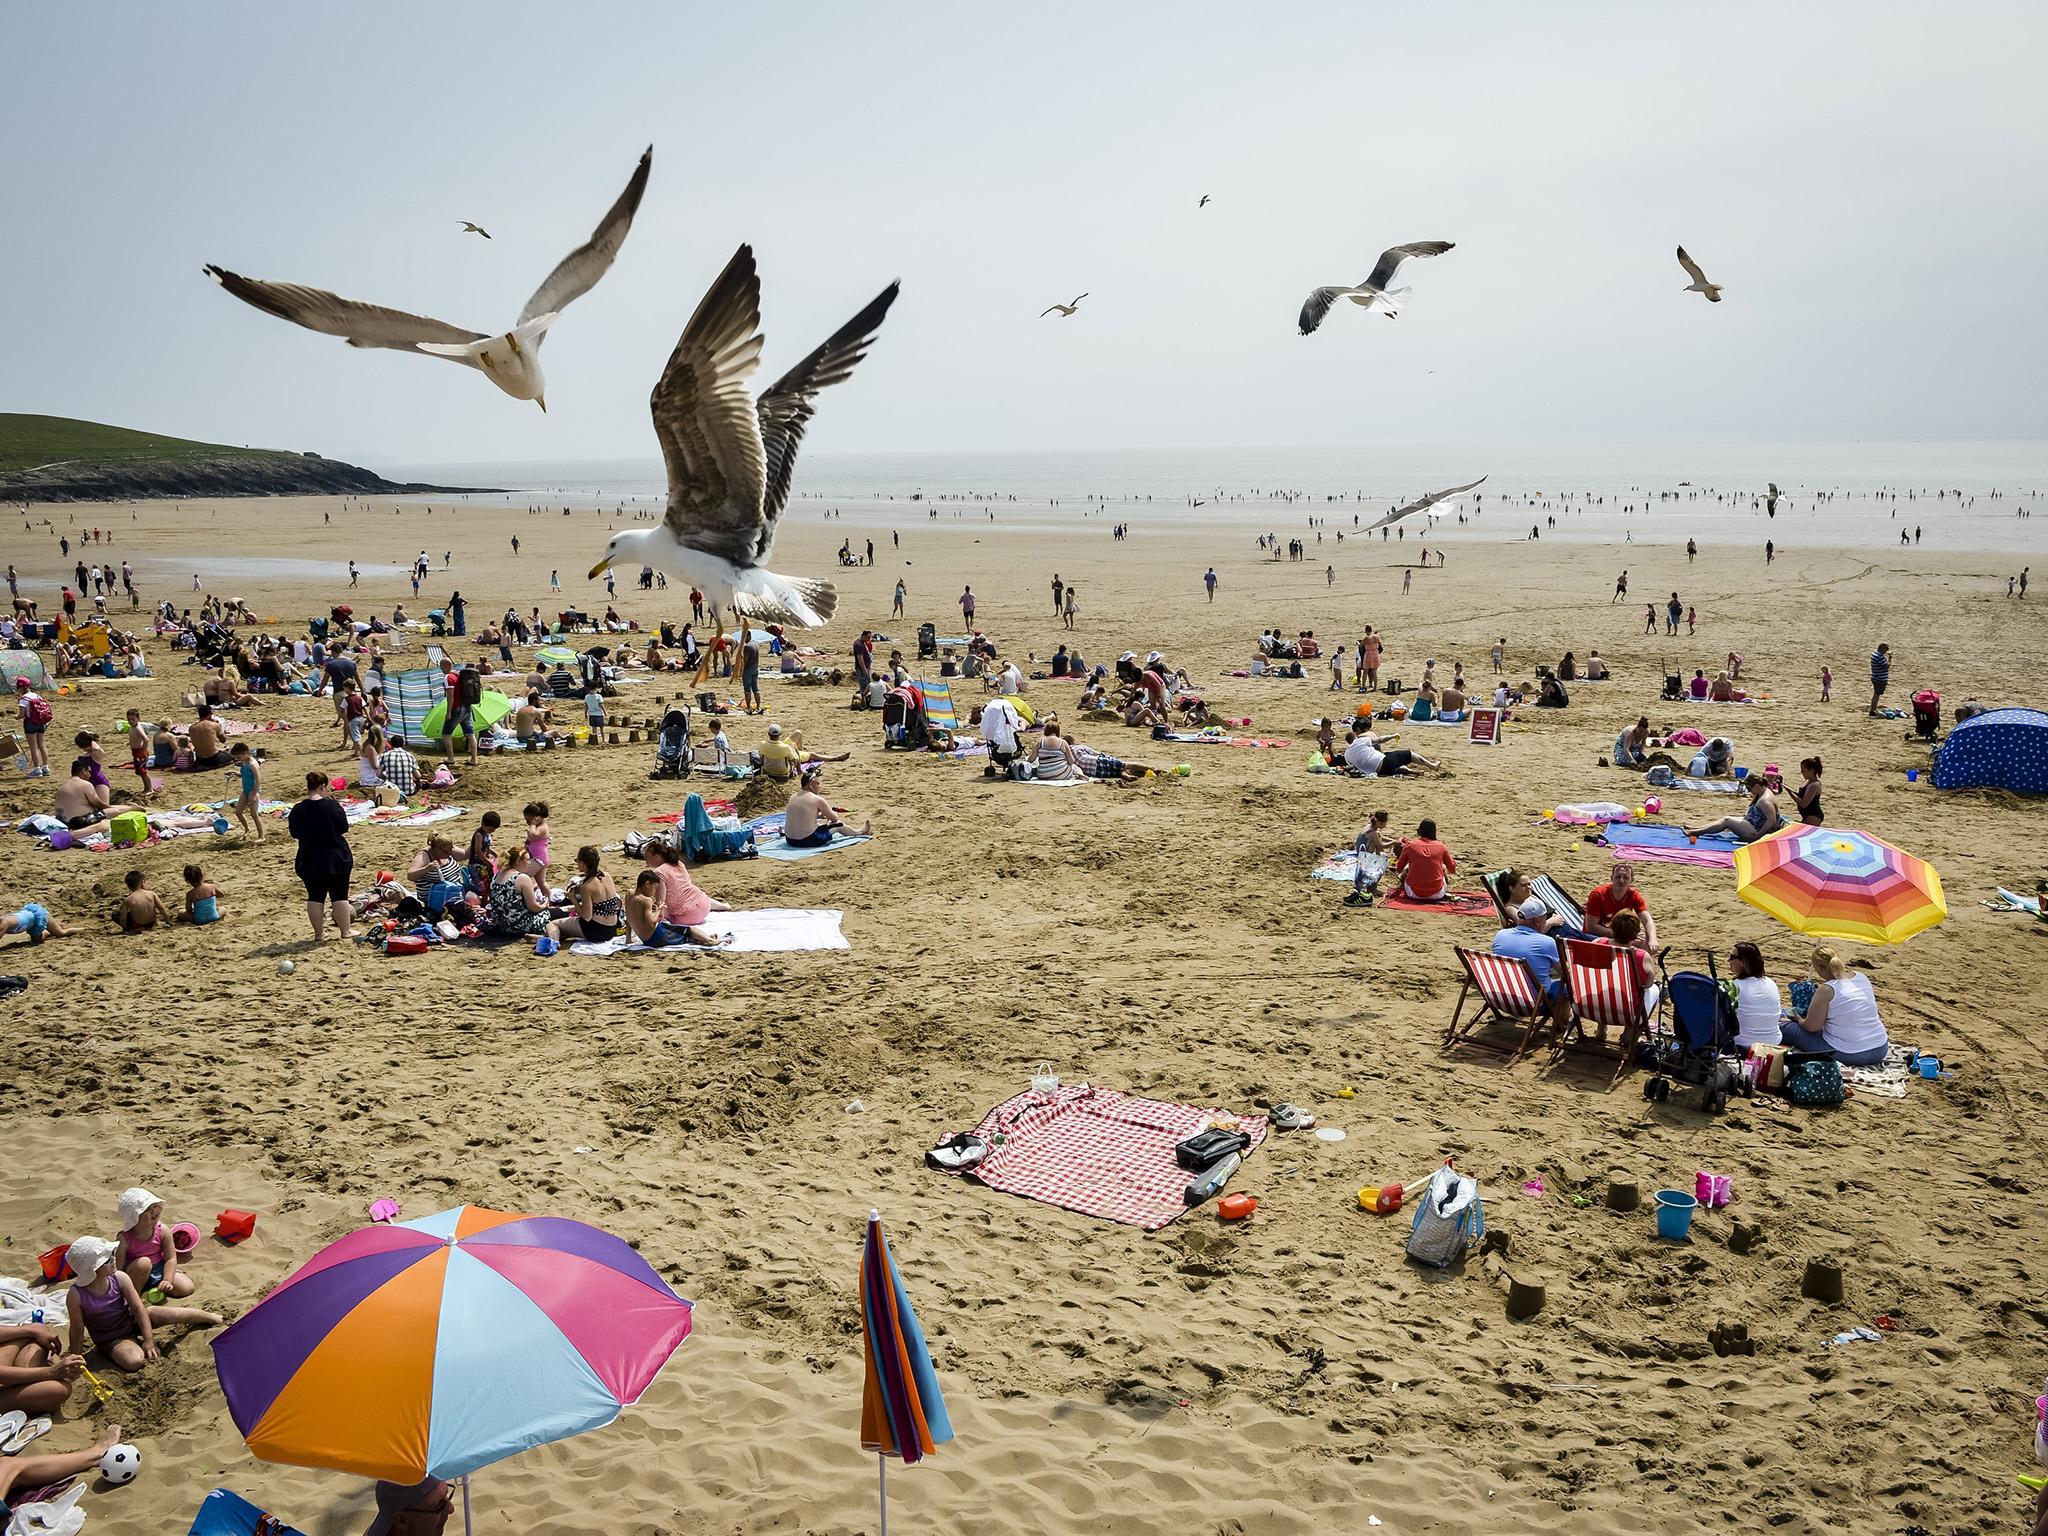 Seagulls at Barry Island: up above, air-support gulls ride the thermals but it's the ground troops that instill most fear – stalking sunbathers and just standing there, staring into their very souls